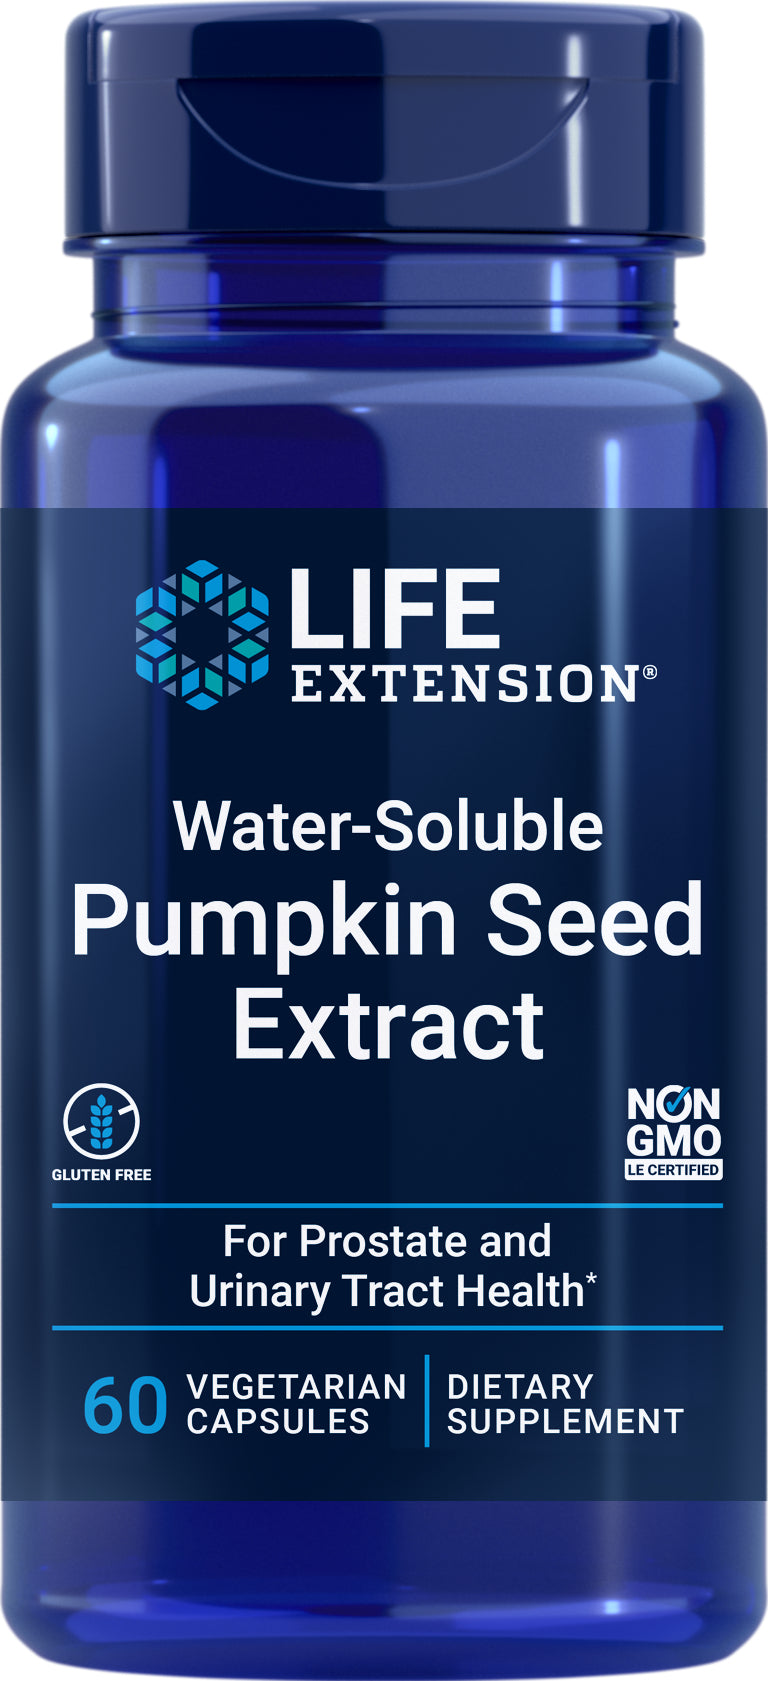 Water-Soluble Pumpkin Seed Extract 60 Veg Caps